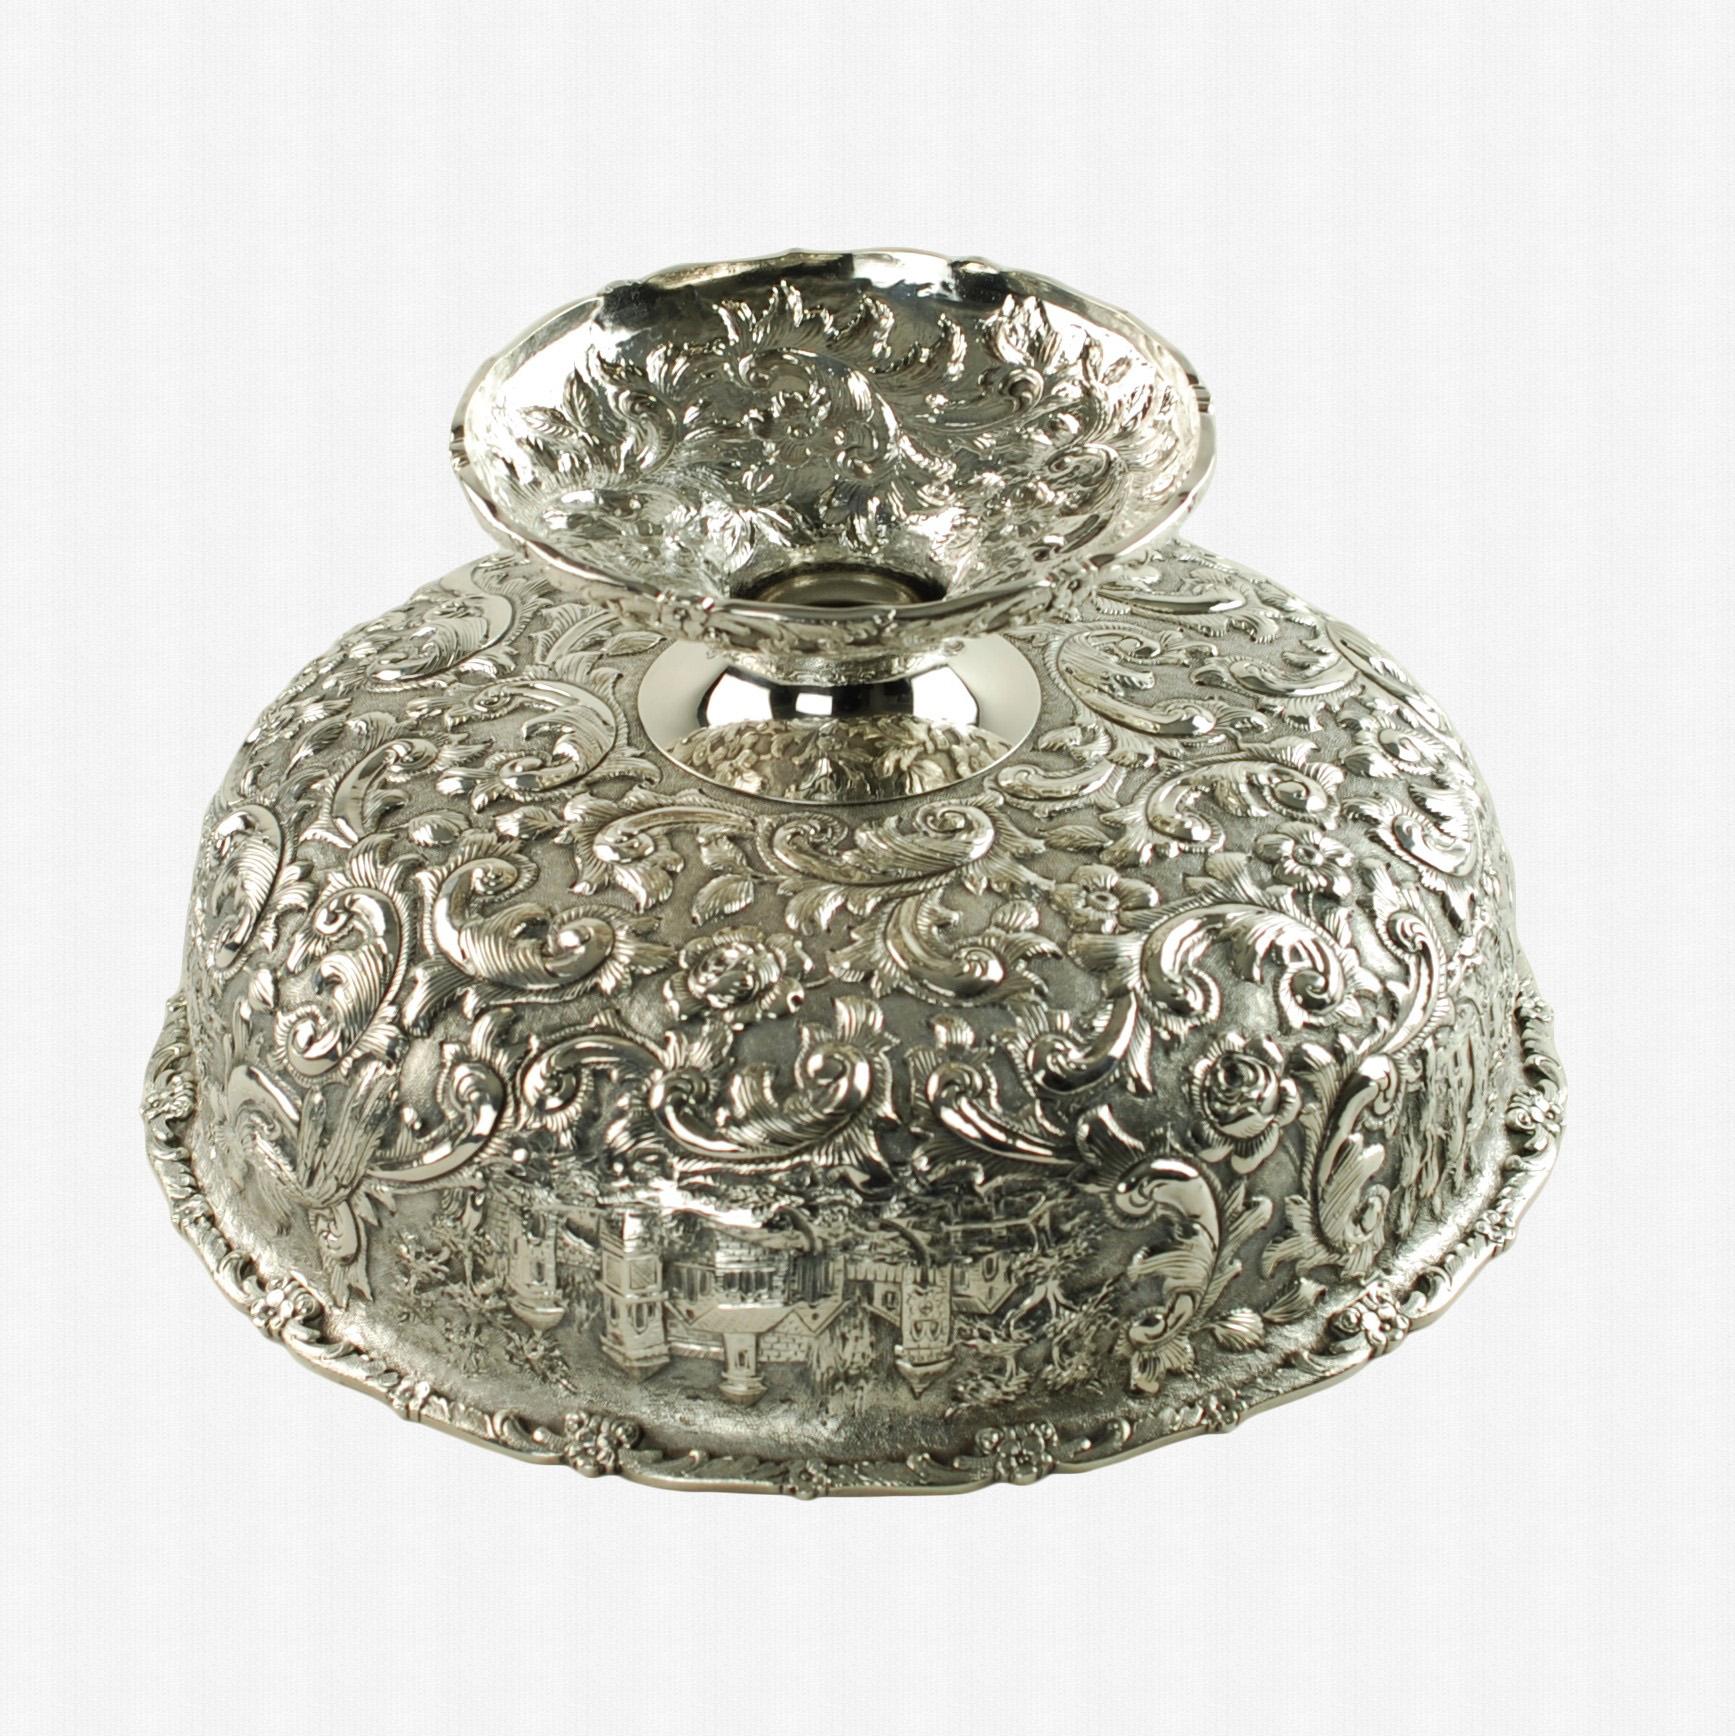 20th Century Loring Andrews Repoussé Sterling Silver Footed Centerpiece Bowl Castle Pattern For Sale